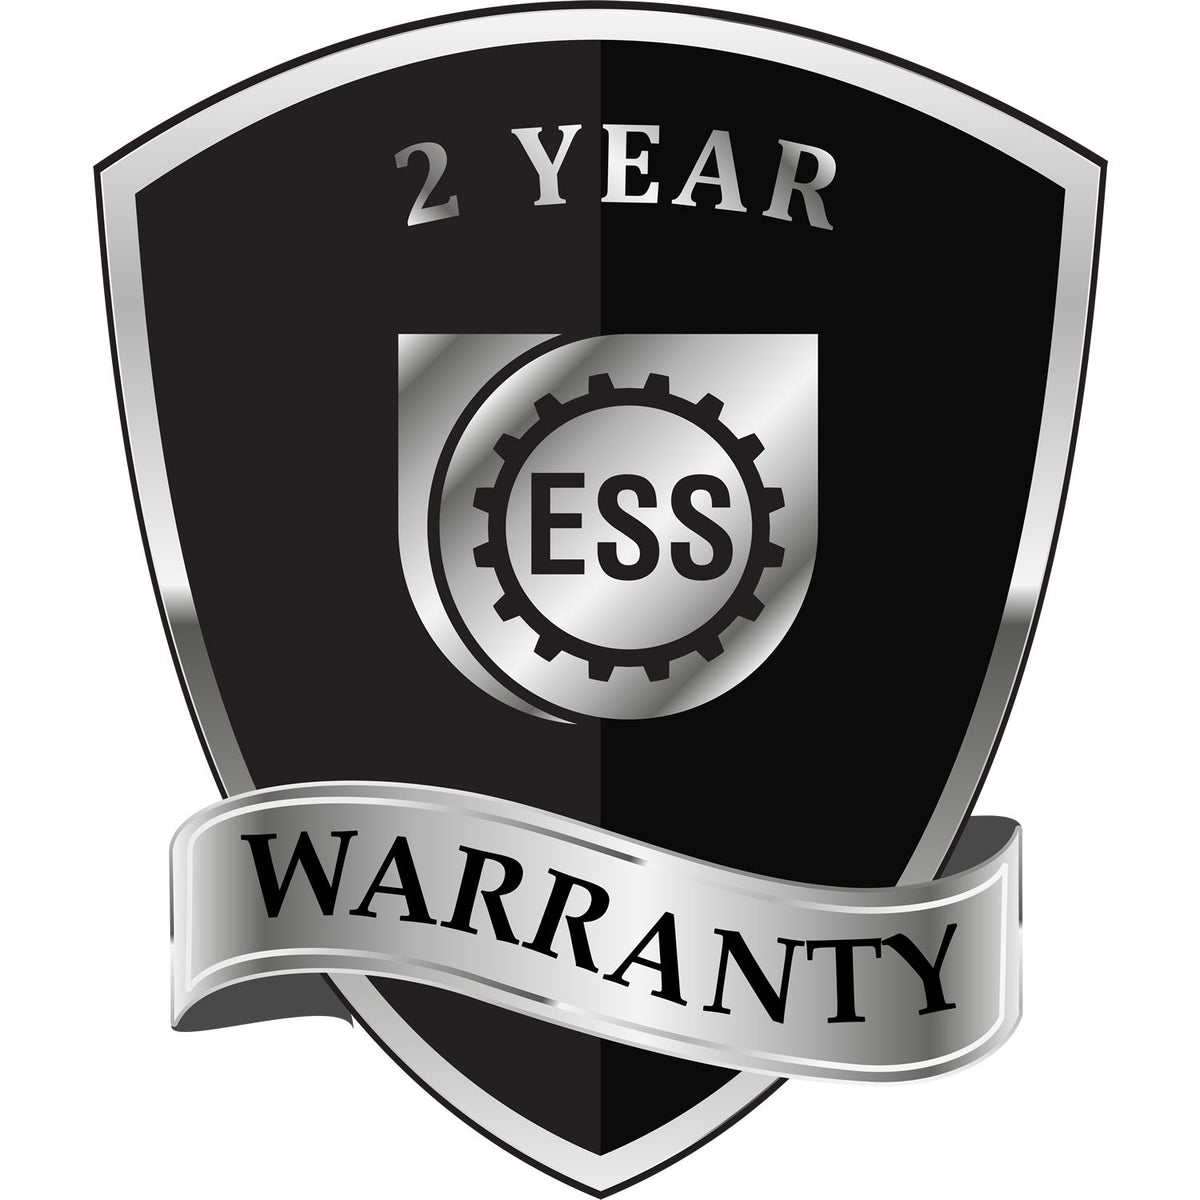 A badge or emblem showing a warranty icon for the Alabama Desk Architect Embossing Seal